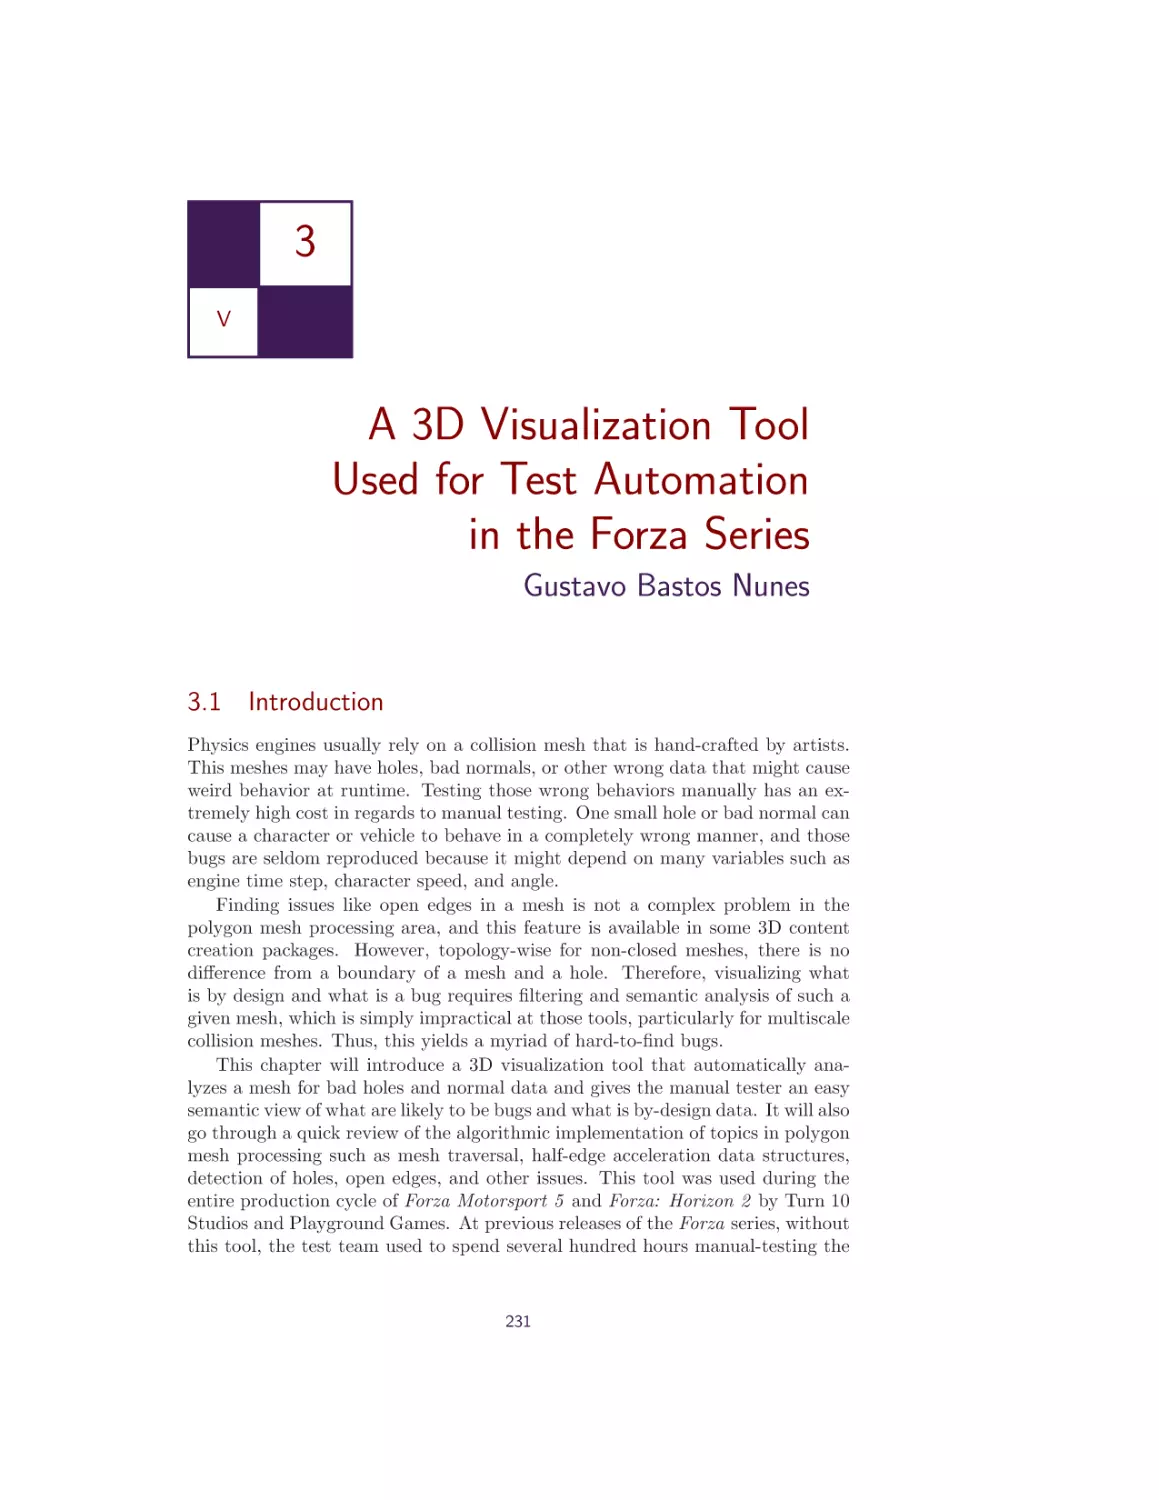 3. A 3D Visualization Tool Used for Test Automation in the Forza Series